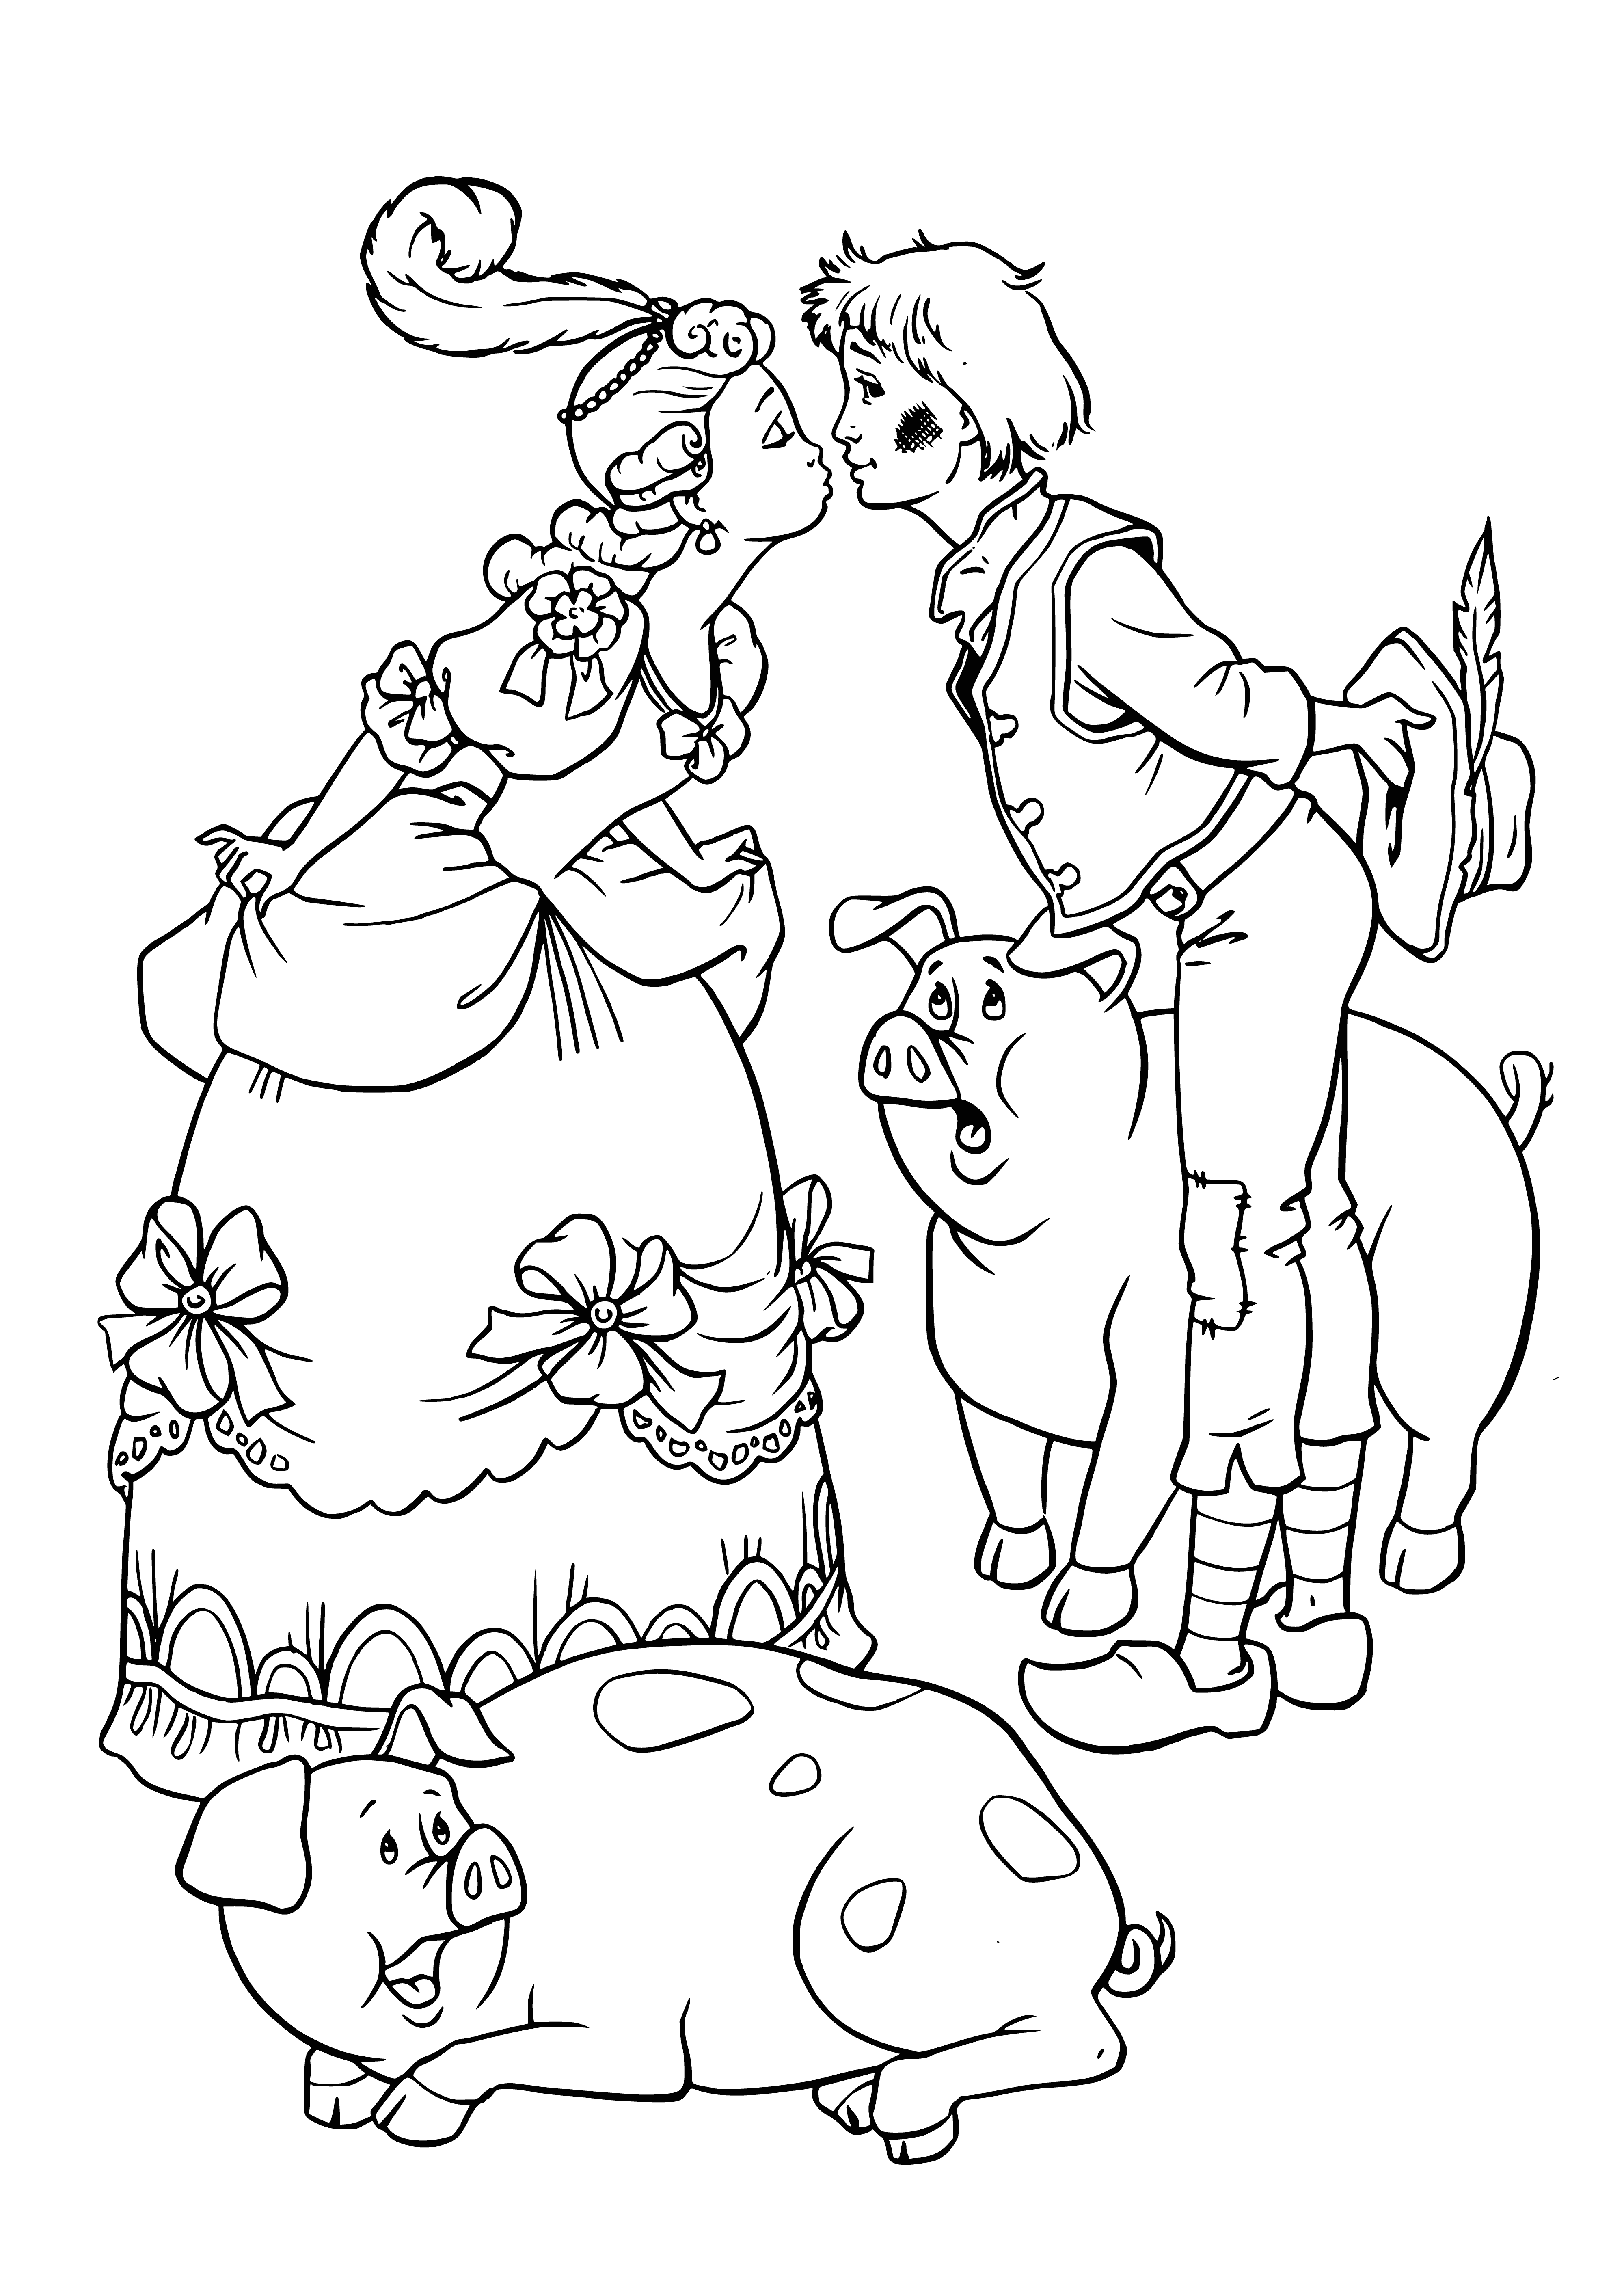 The princess and the swineherd coloring page